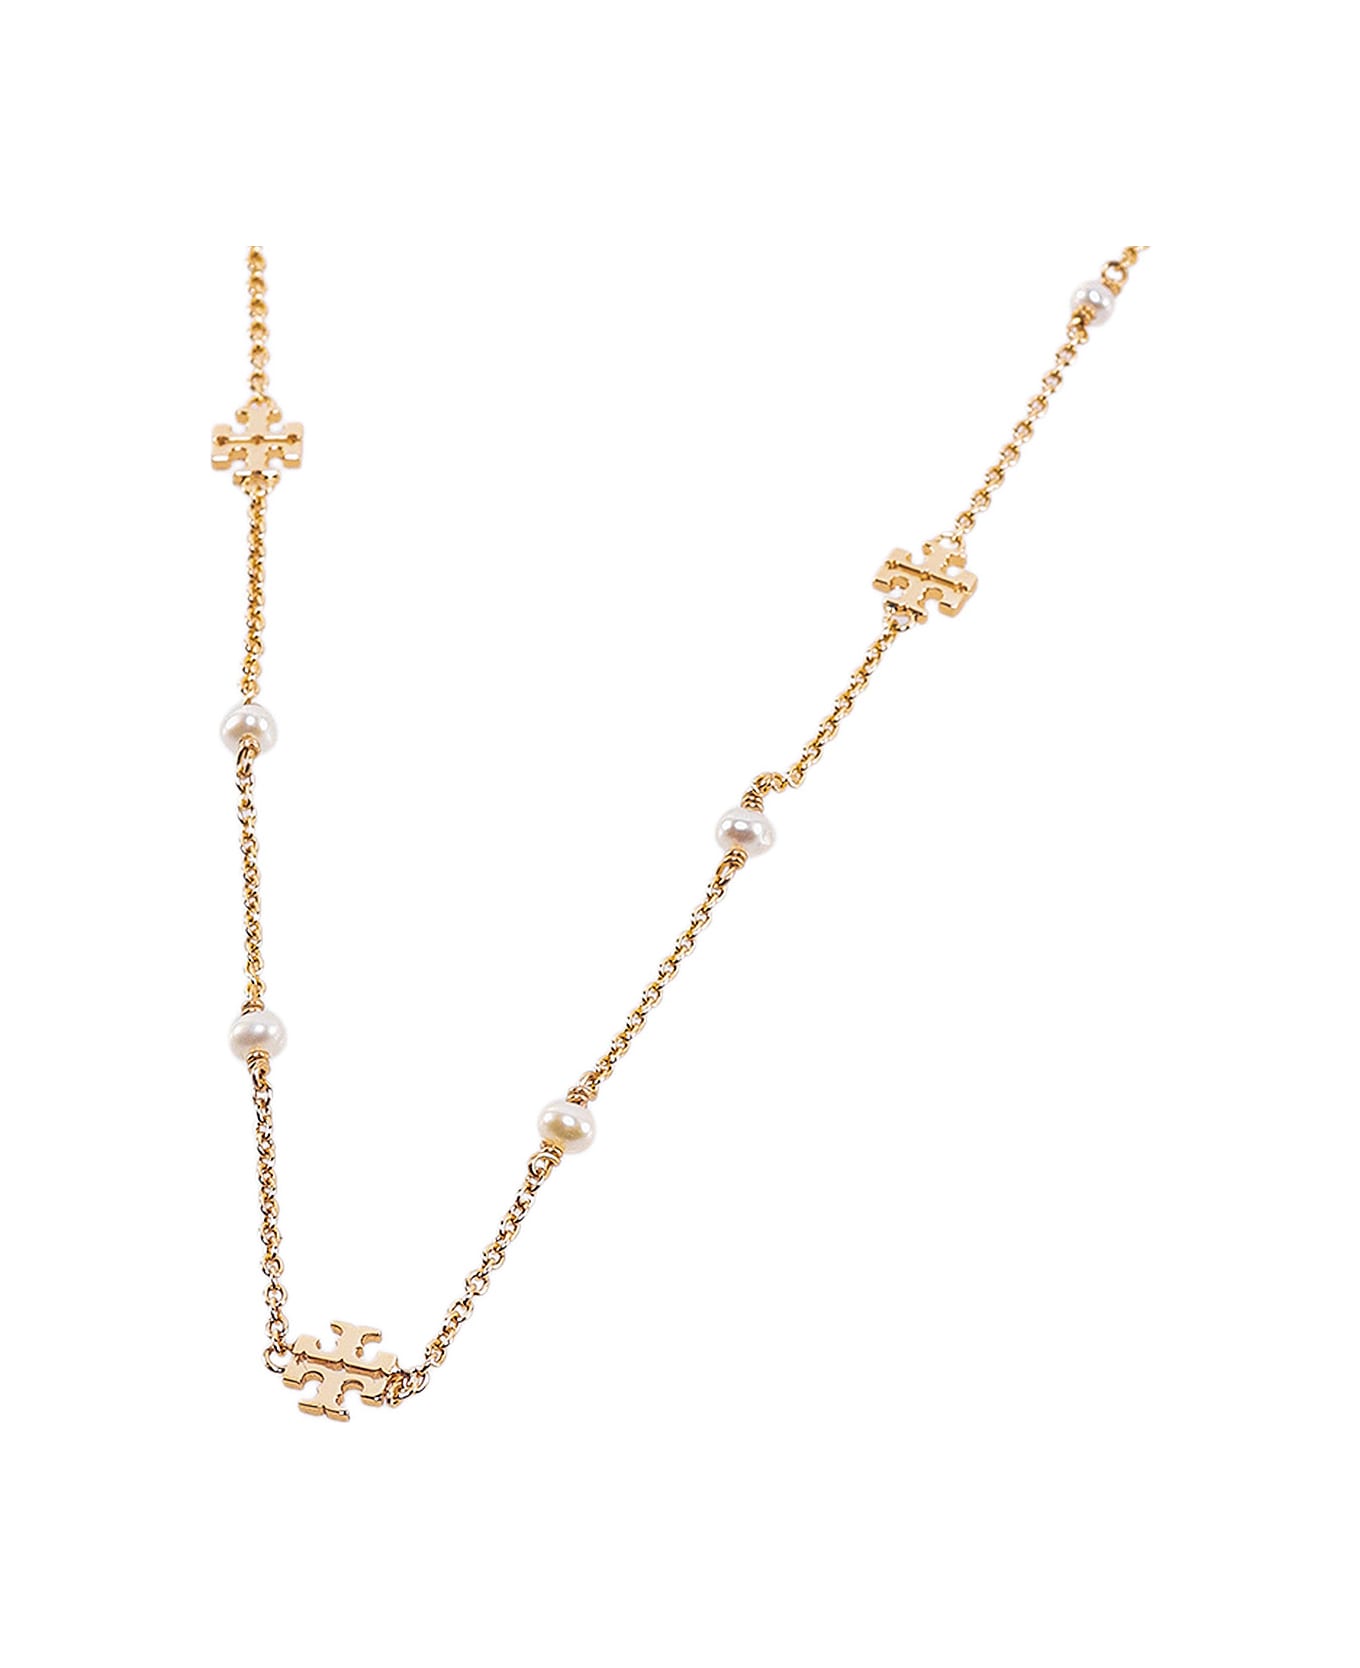 Tory Burch Necklace - Gold ネックレス